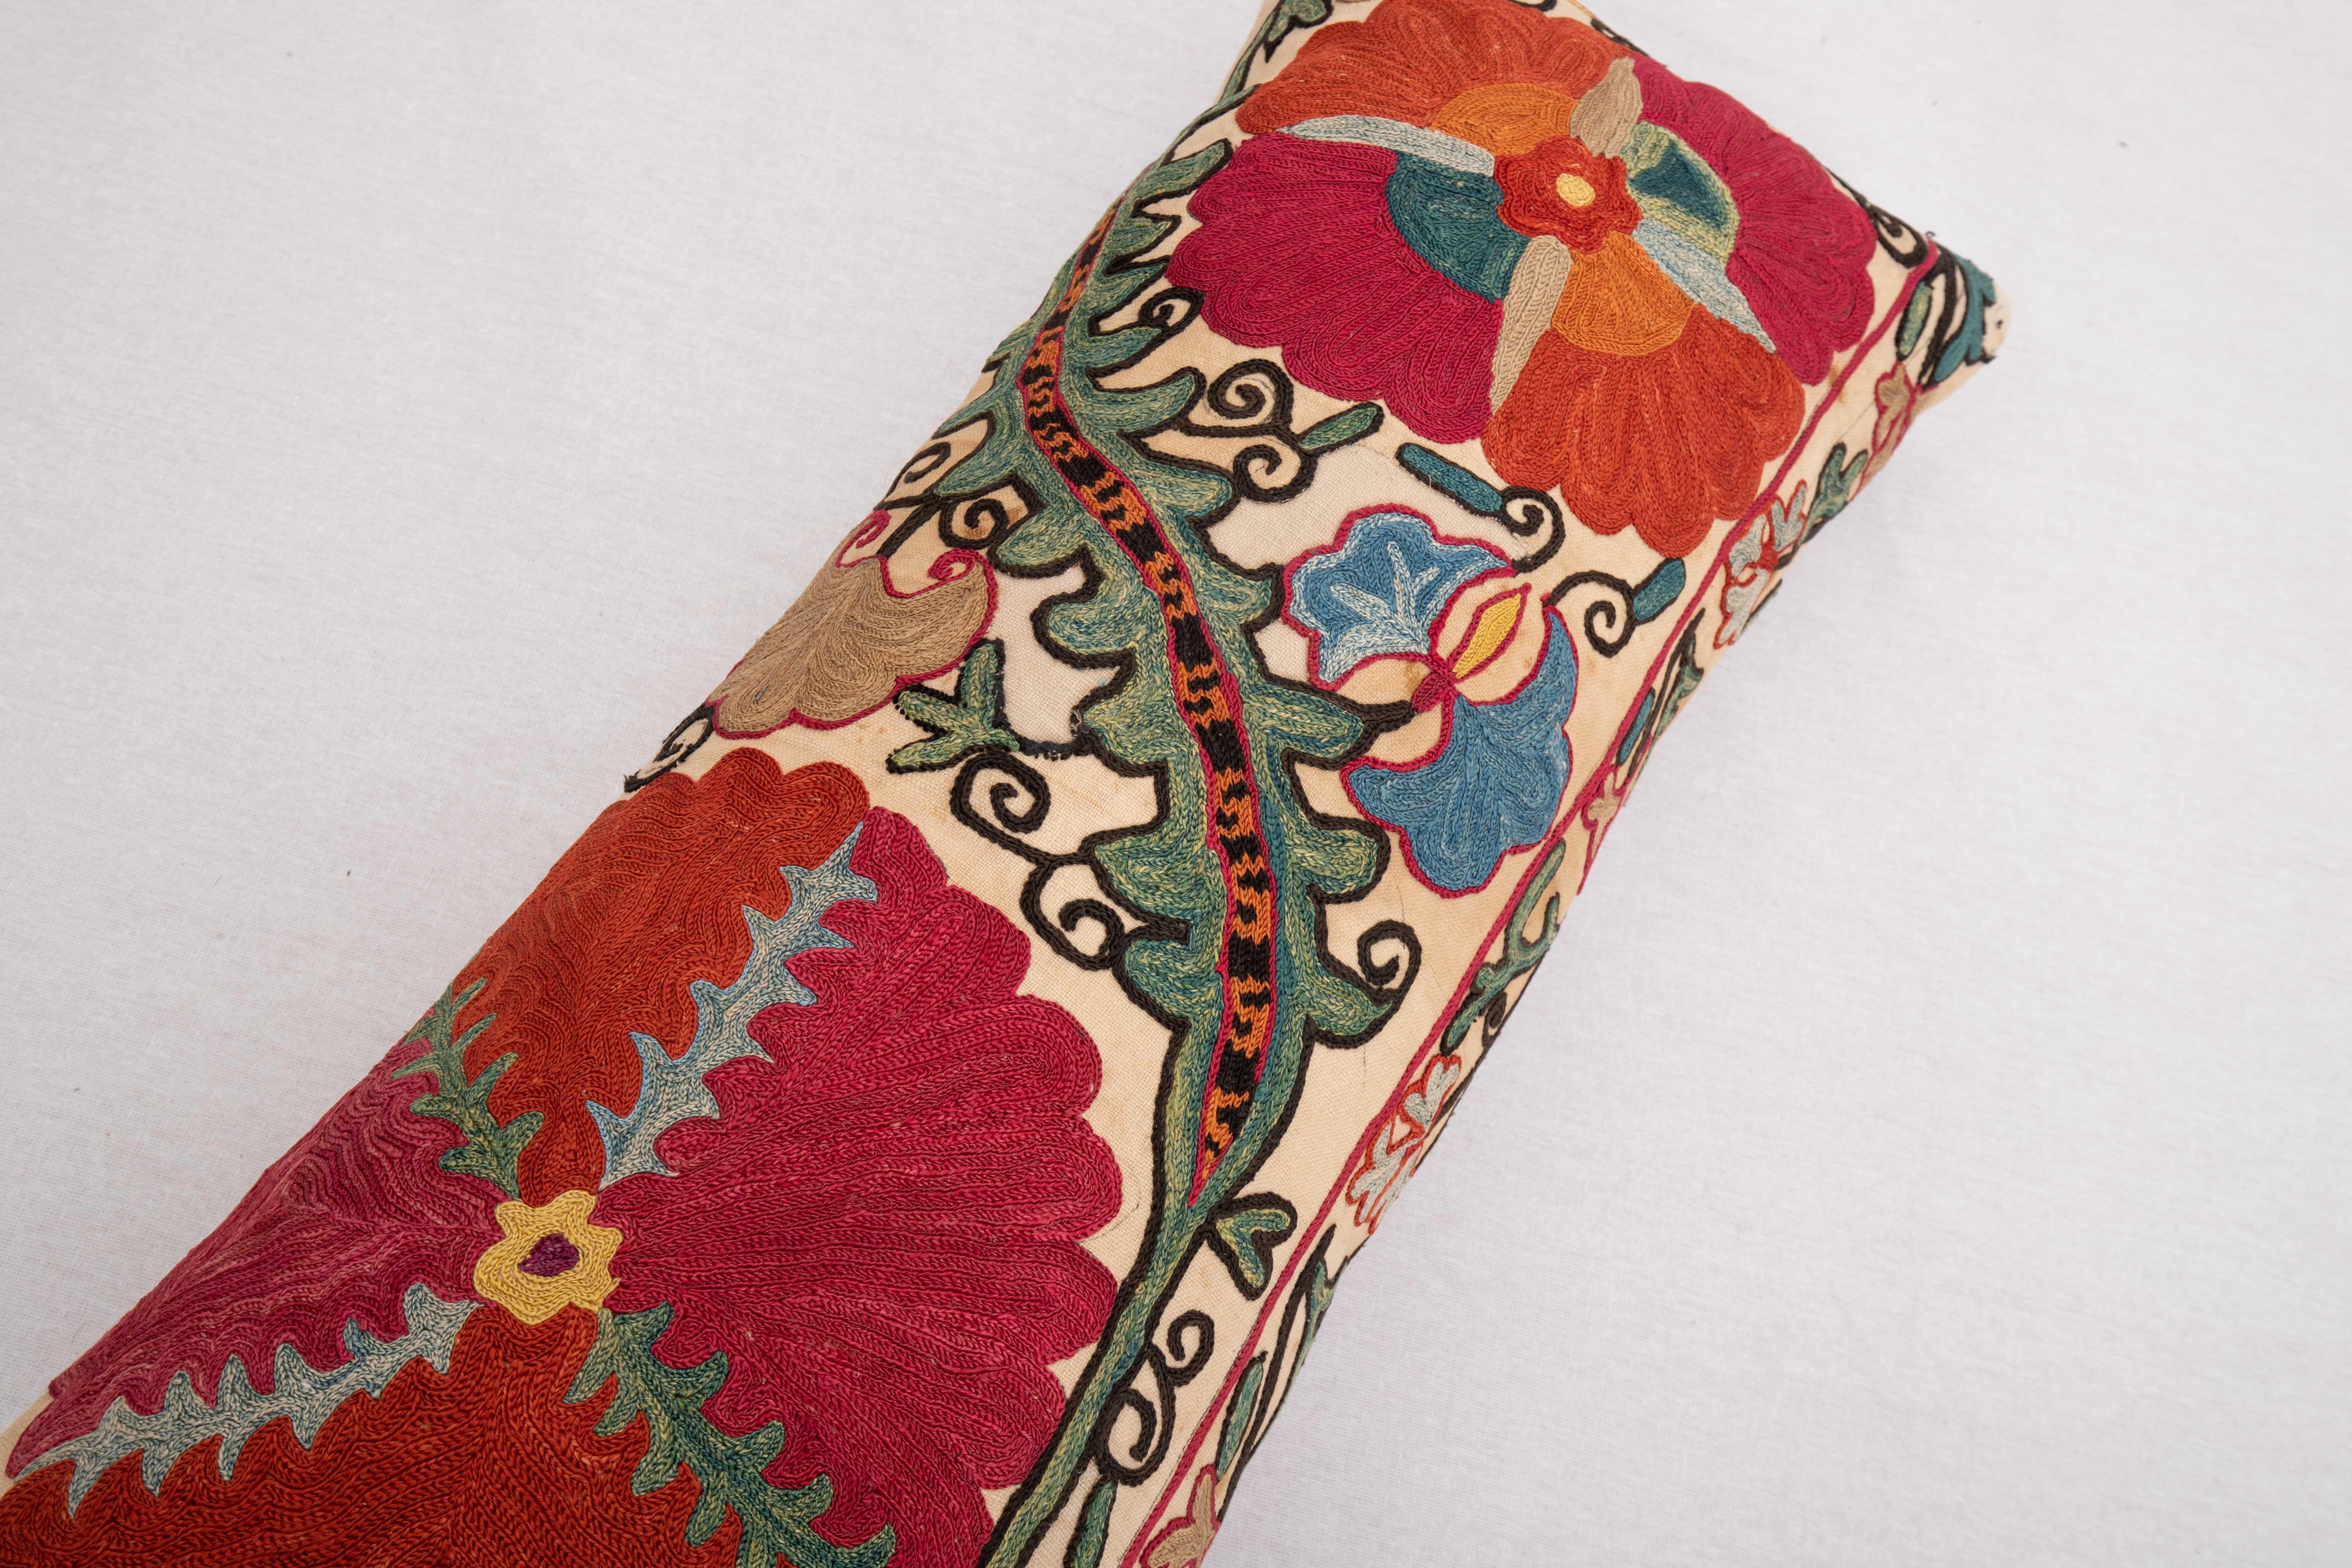 19th Century Suzani Pillow Case Made from an Antique Suzani Fragment, 19th C